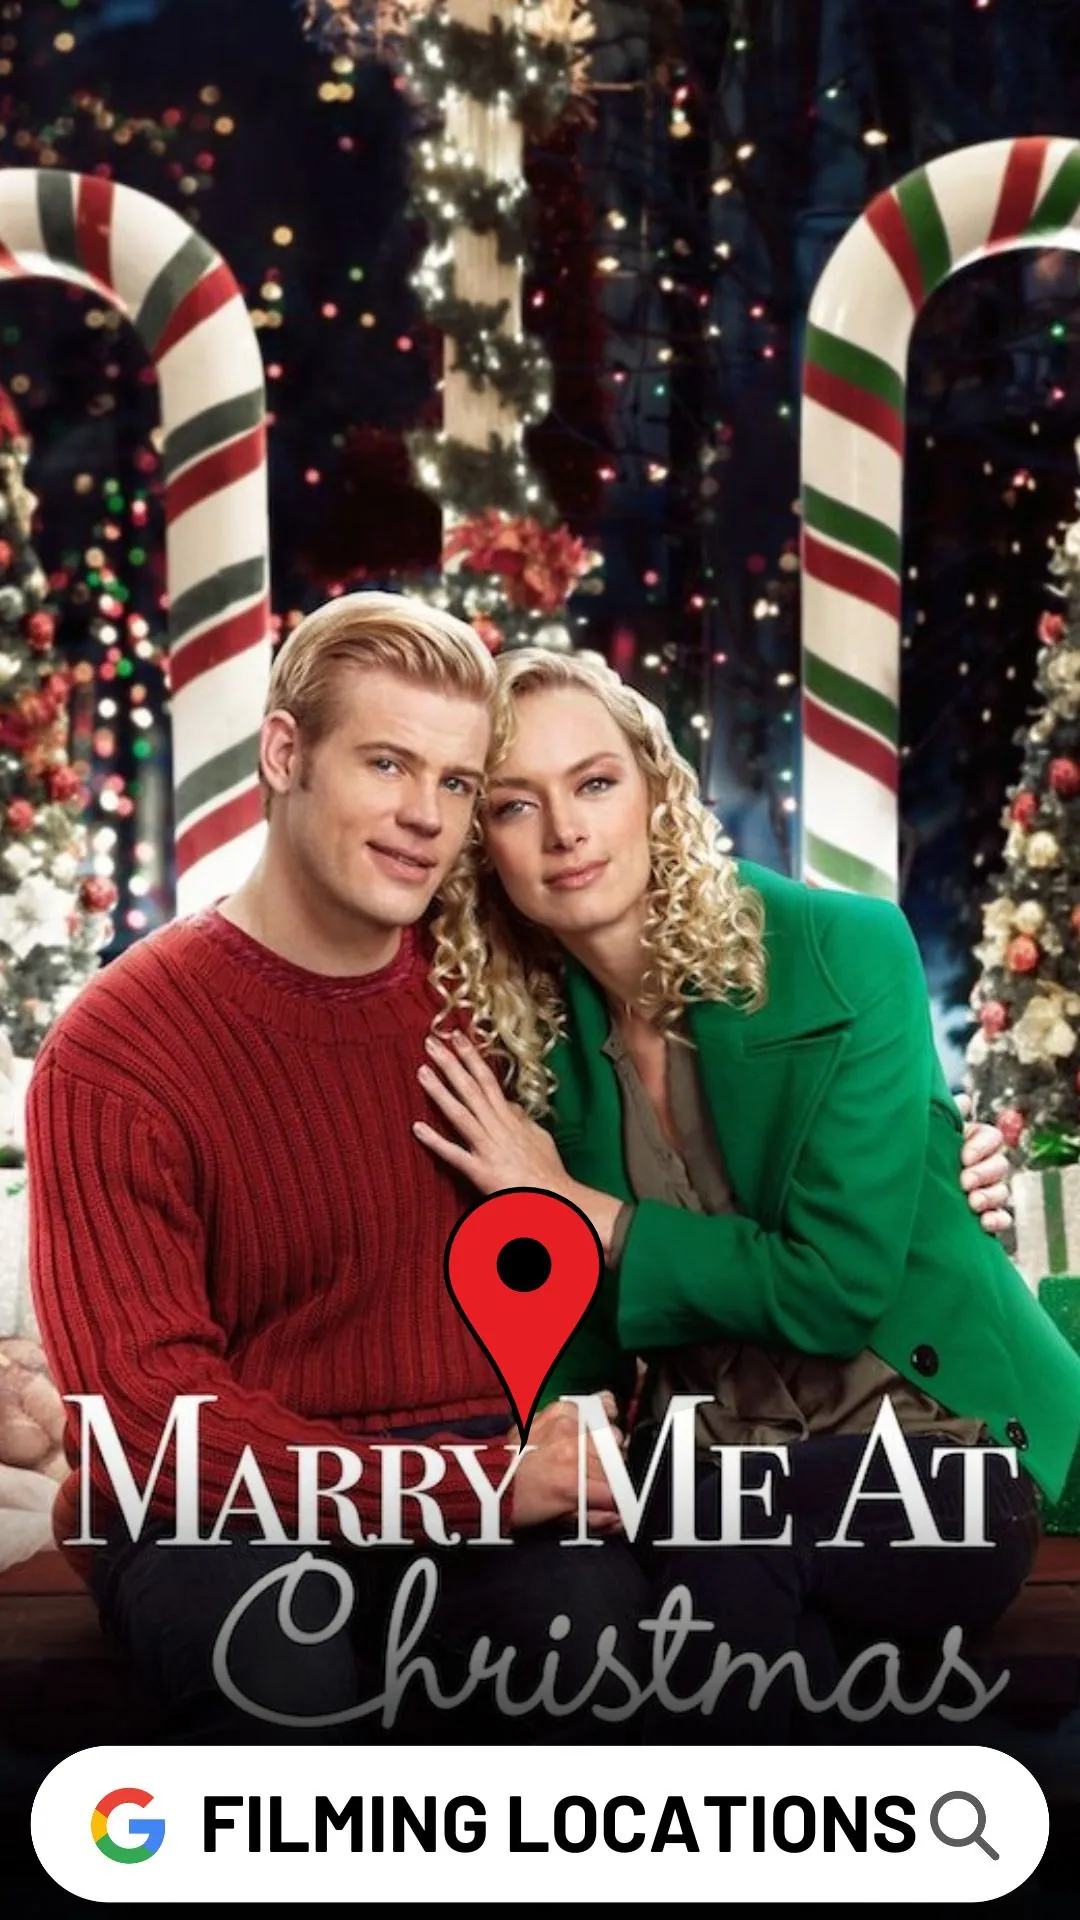 Marry Me at Christmas Filming Locations